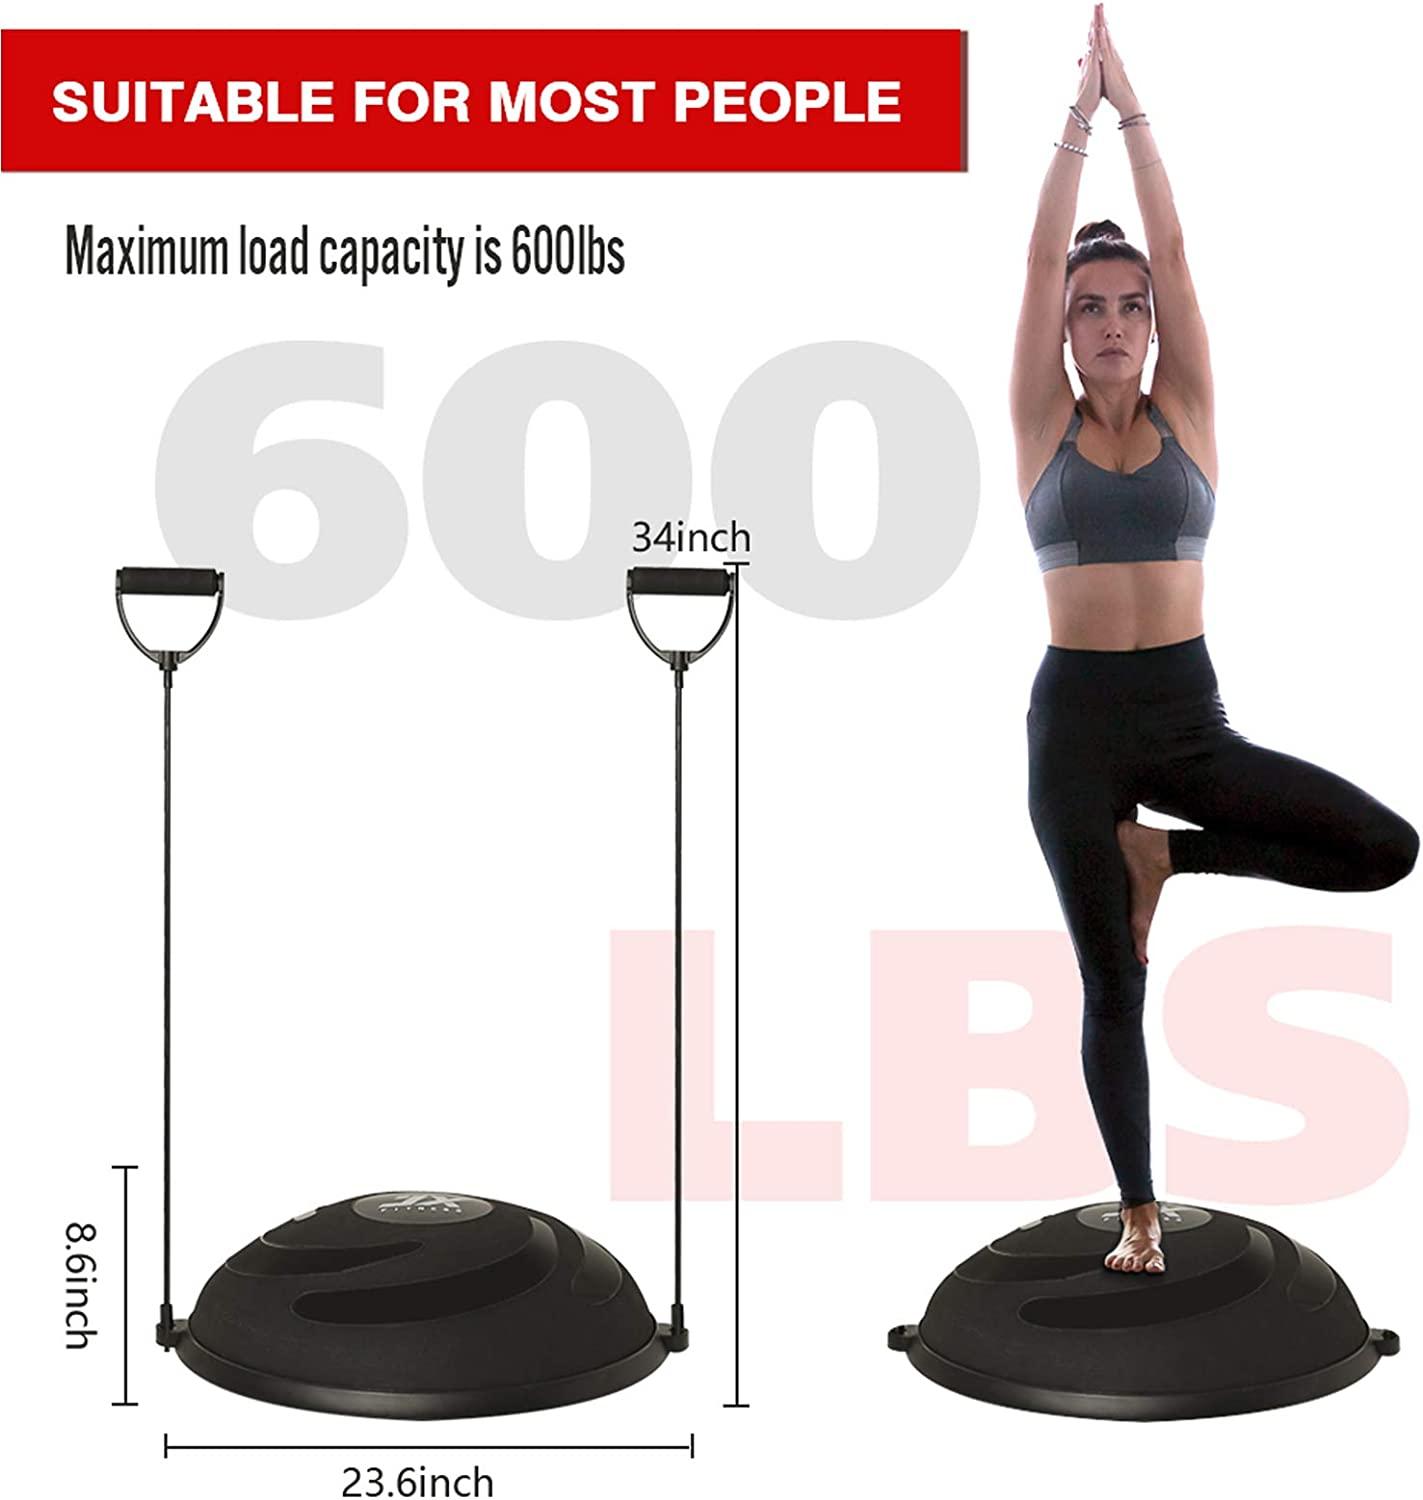  JX FITNESS 58cm Balance Half Ball Trainer, Stability Exercise  Yoga Half Ball with Resistance Bands & Pump - Improve Core and Ab Strength  with Full Body Home Gym Workouts Or Fitness